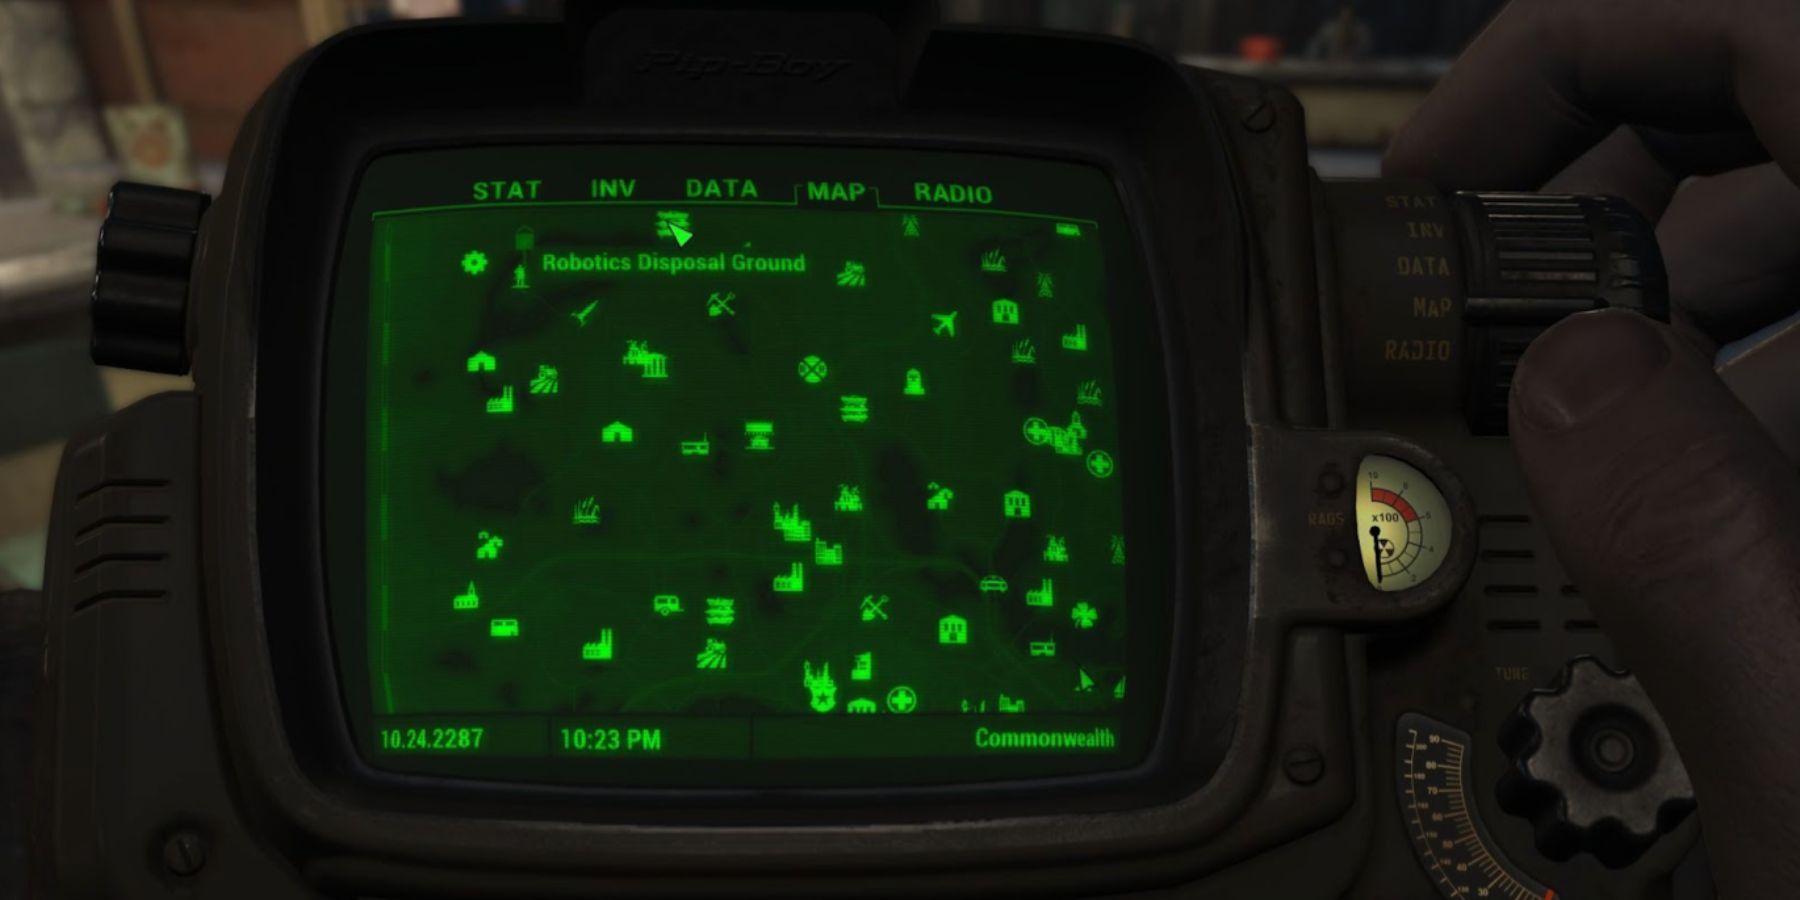 Robotics Disposal Ground location on the map in Fallout 4